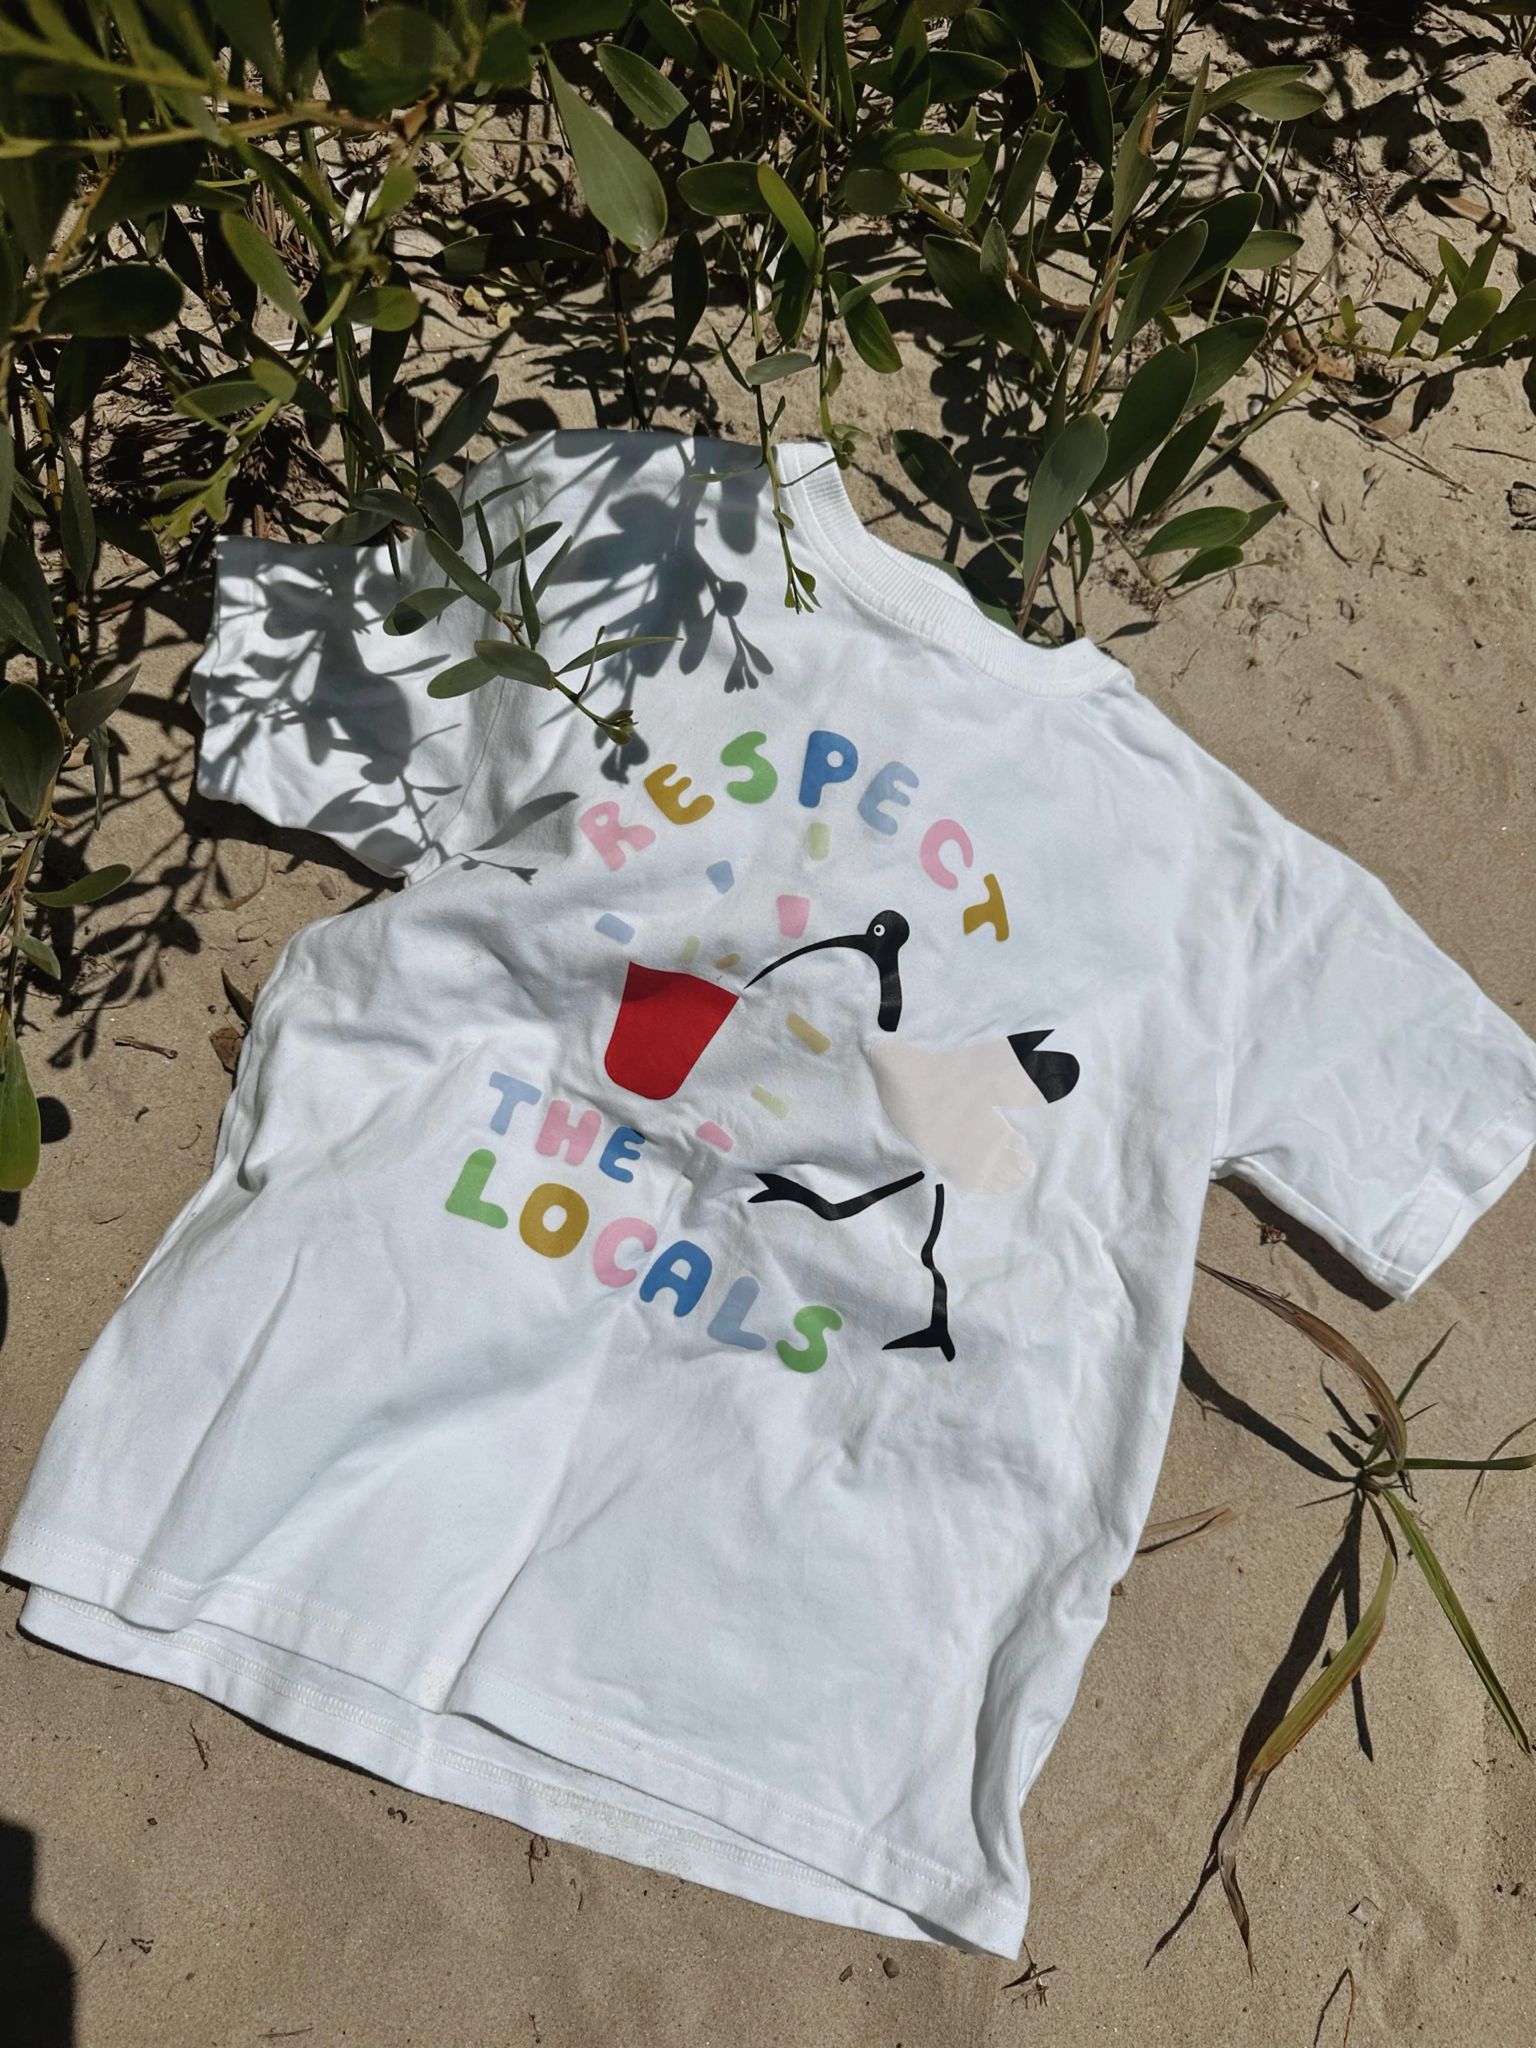 for the free respect tee